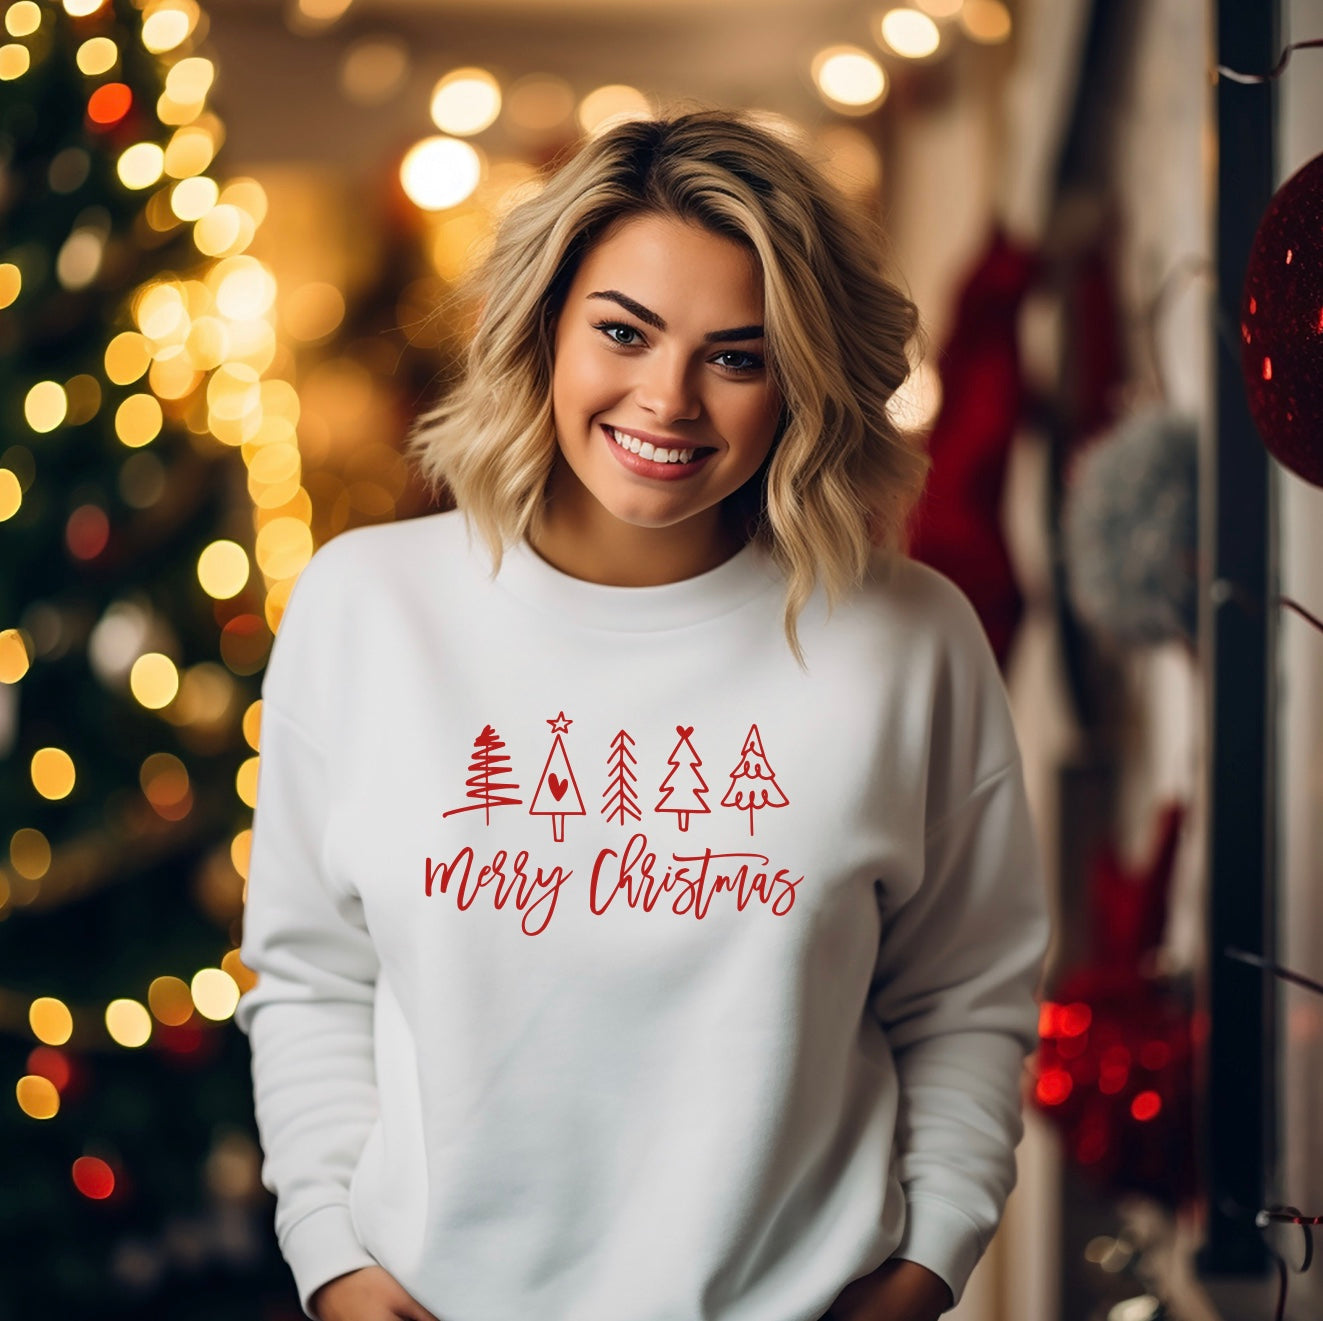 Merry Christmas crewneck sweatshirt with Christmas tree design for women in white